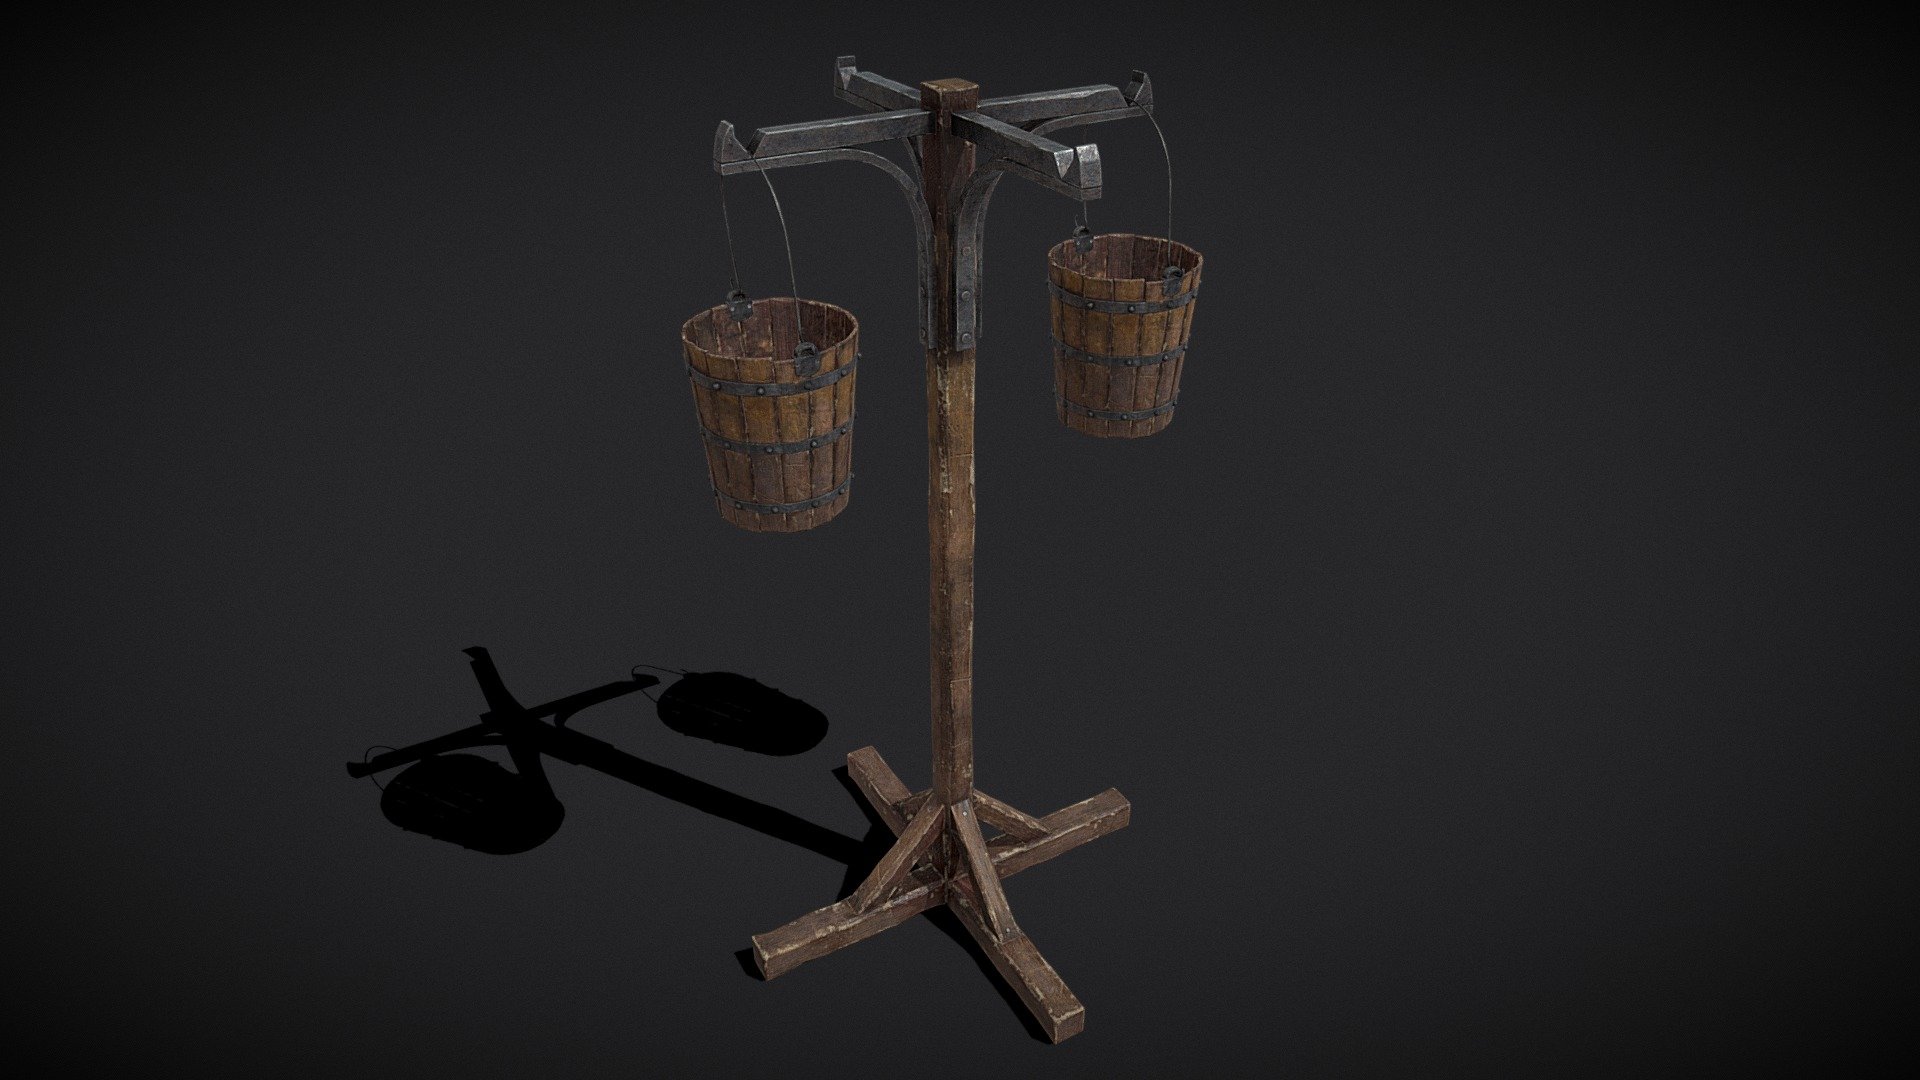 Bucket and Stand 
Bucket and Stand - 3D Model Files Include FBX and OBJ. Includes PBR Texture in 4096 x 4096 3d model